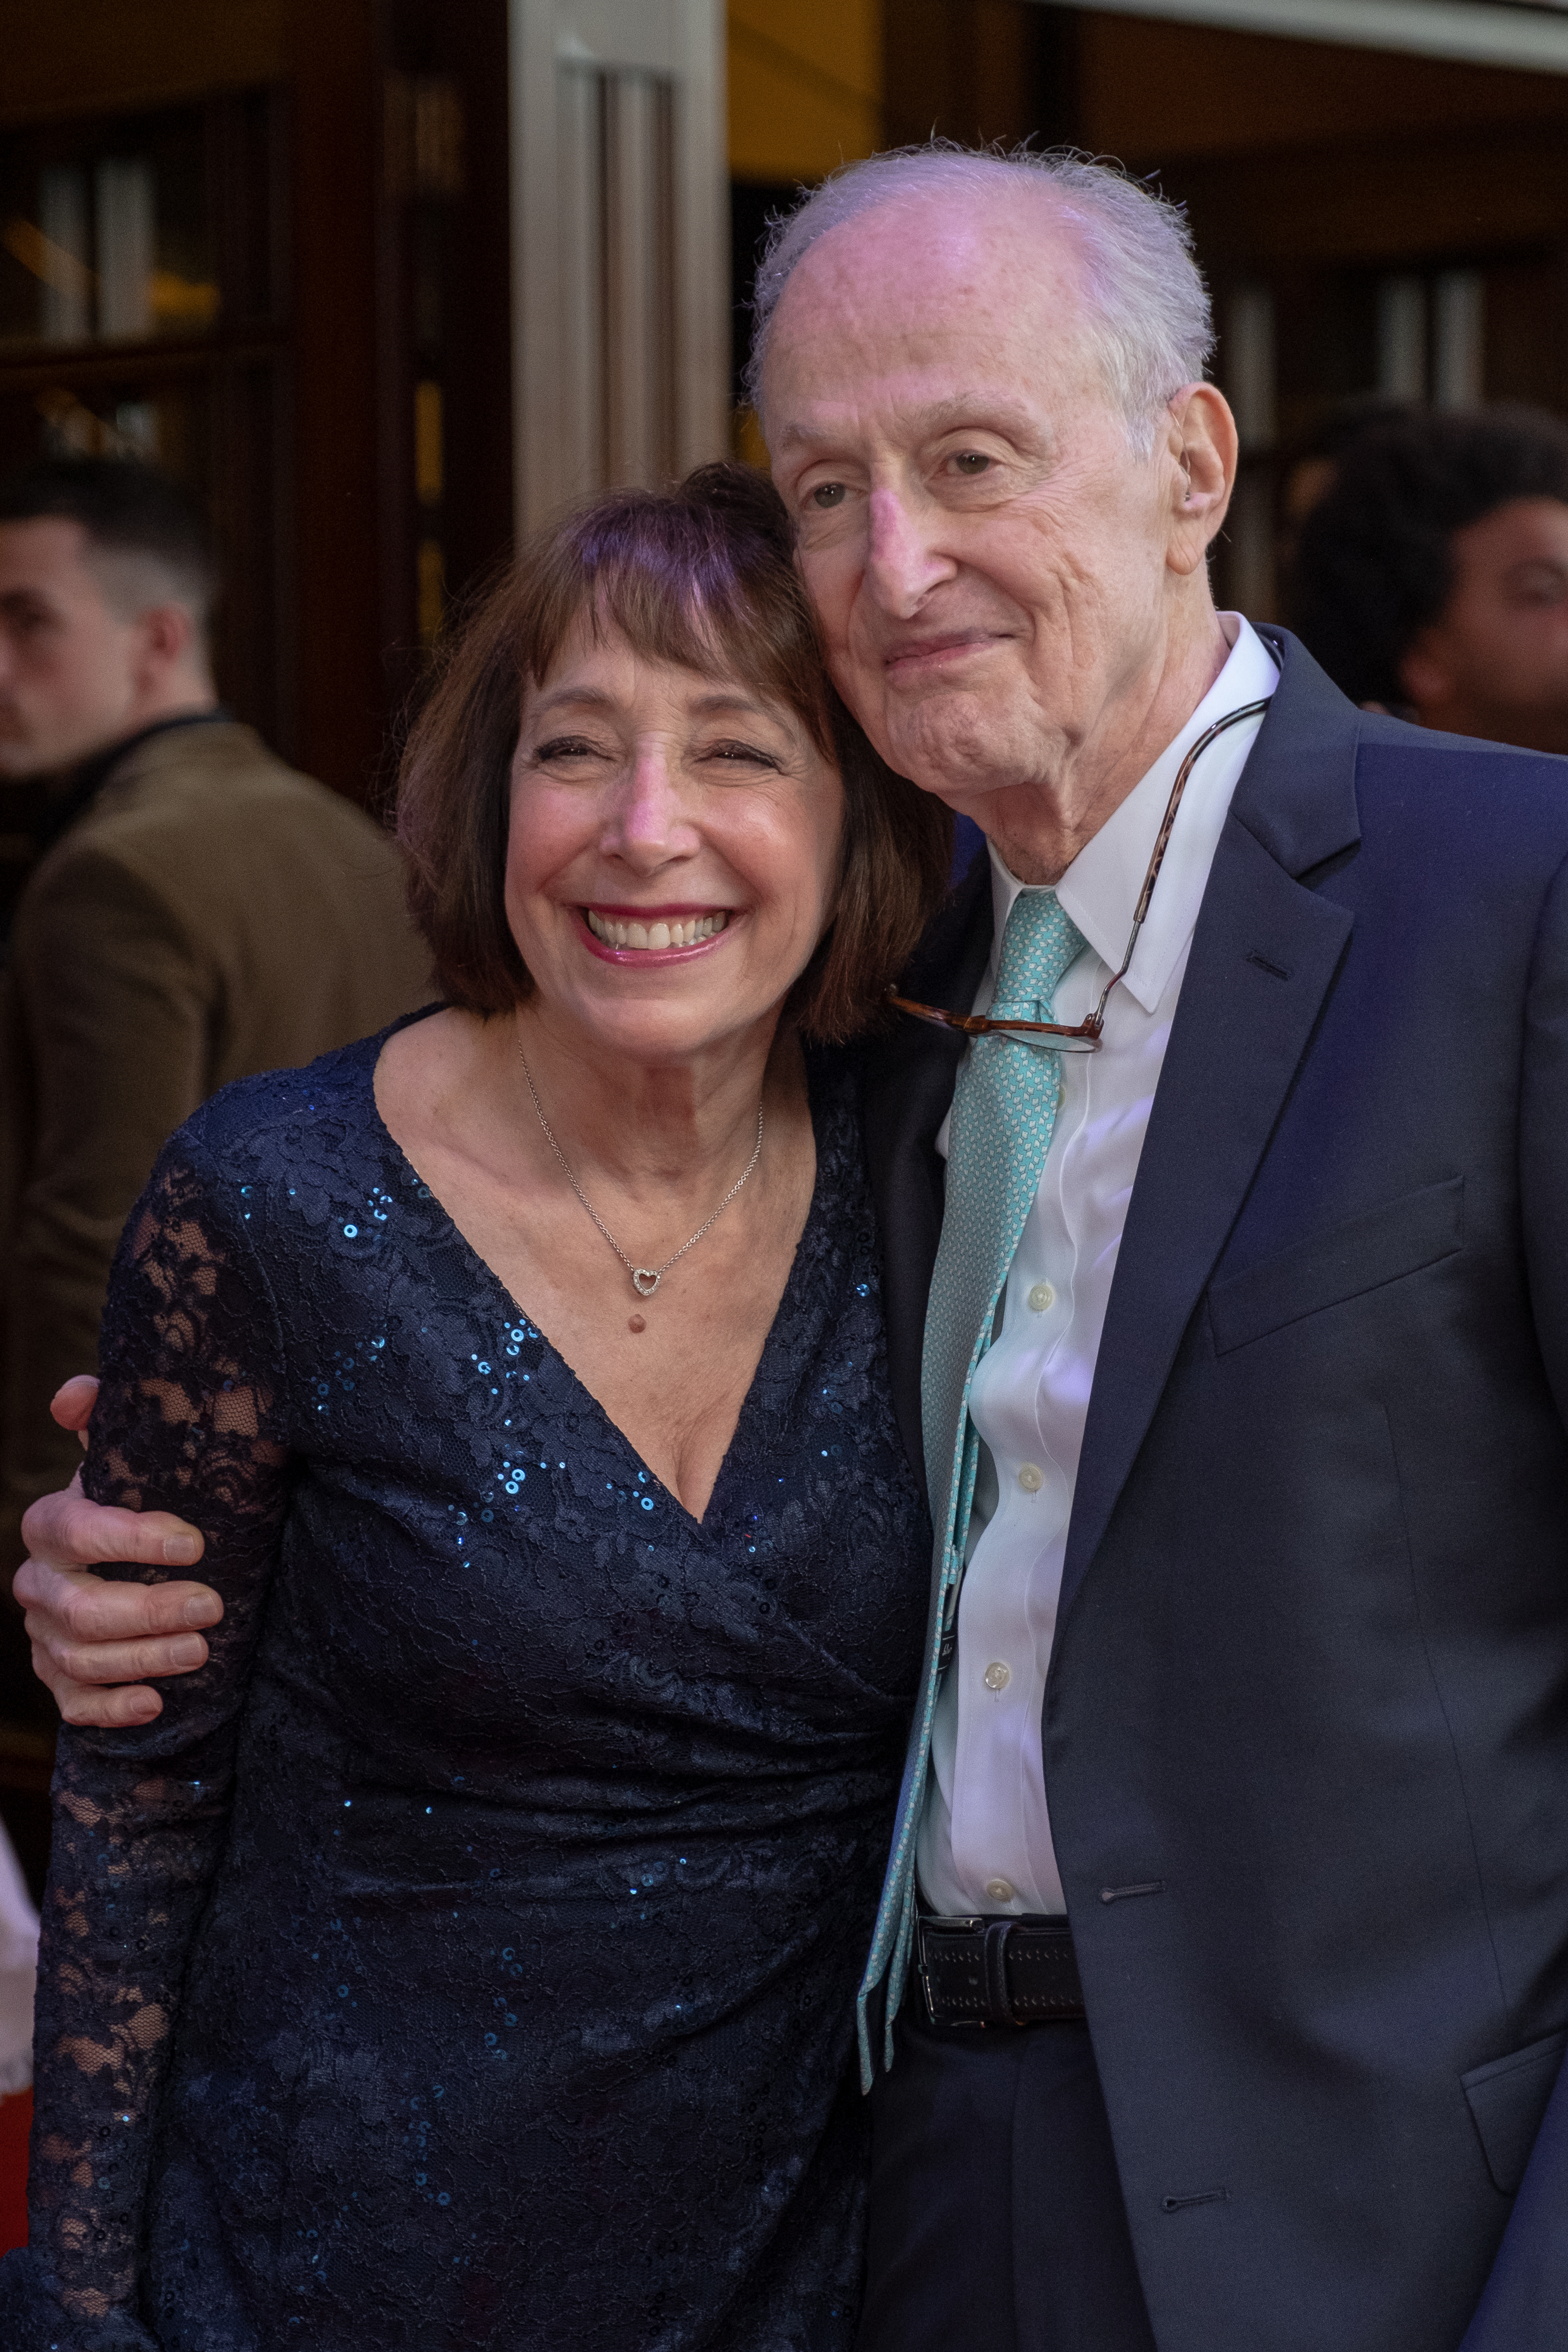 Didi Conn and David Shire at the gala performance of "Big The Musical" on September 17, 2019, in London | Source: Getty Images